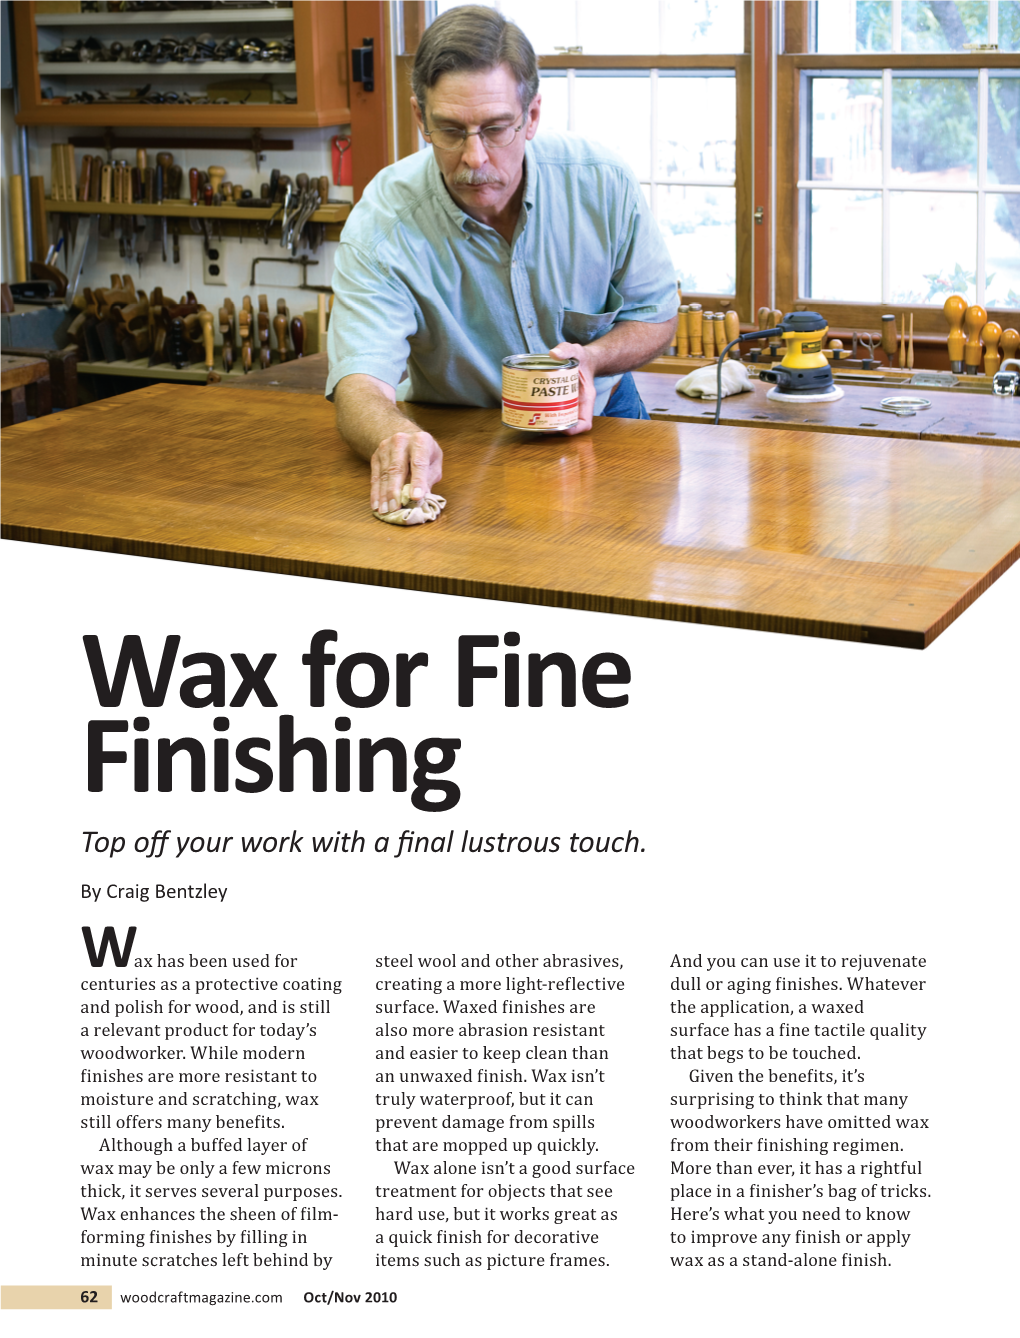 Wax for Fine Finishing Top Oﬀ Your Work with a ﬁ Nal Lustrous Touch